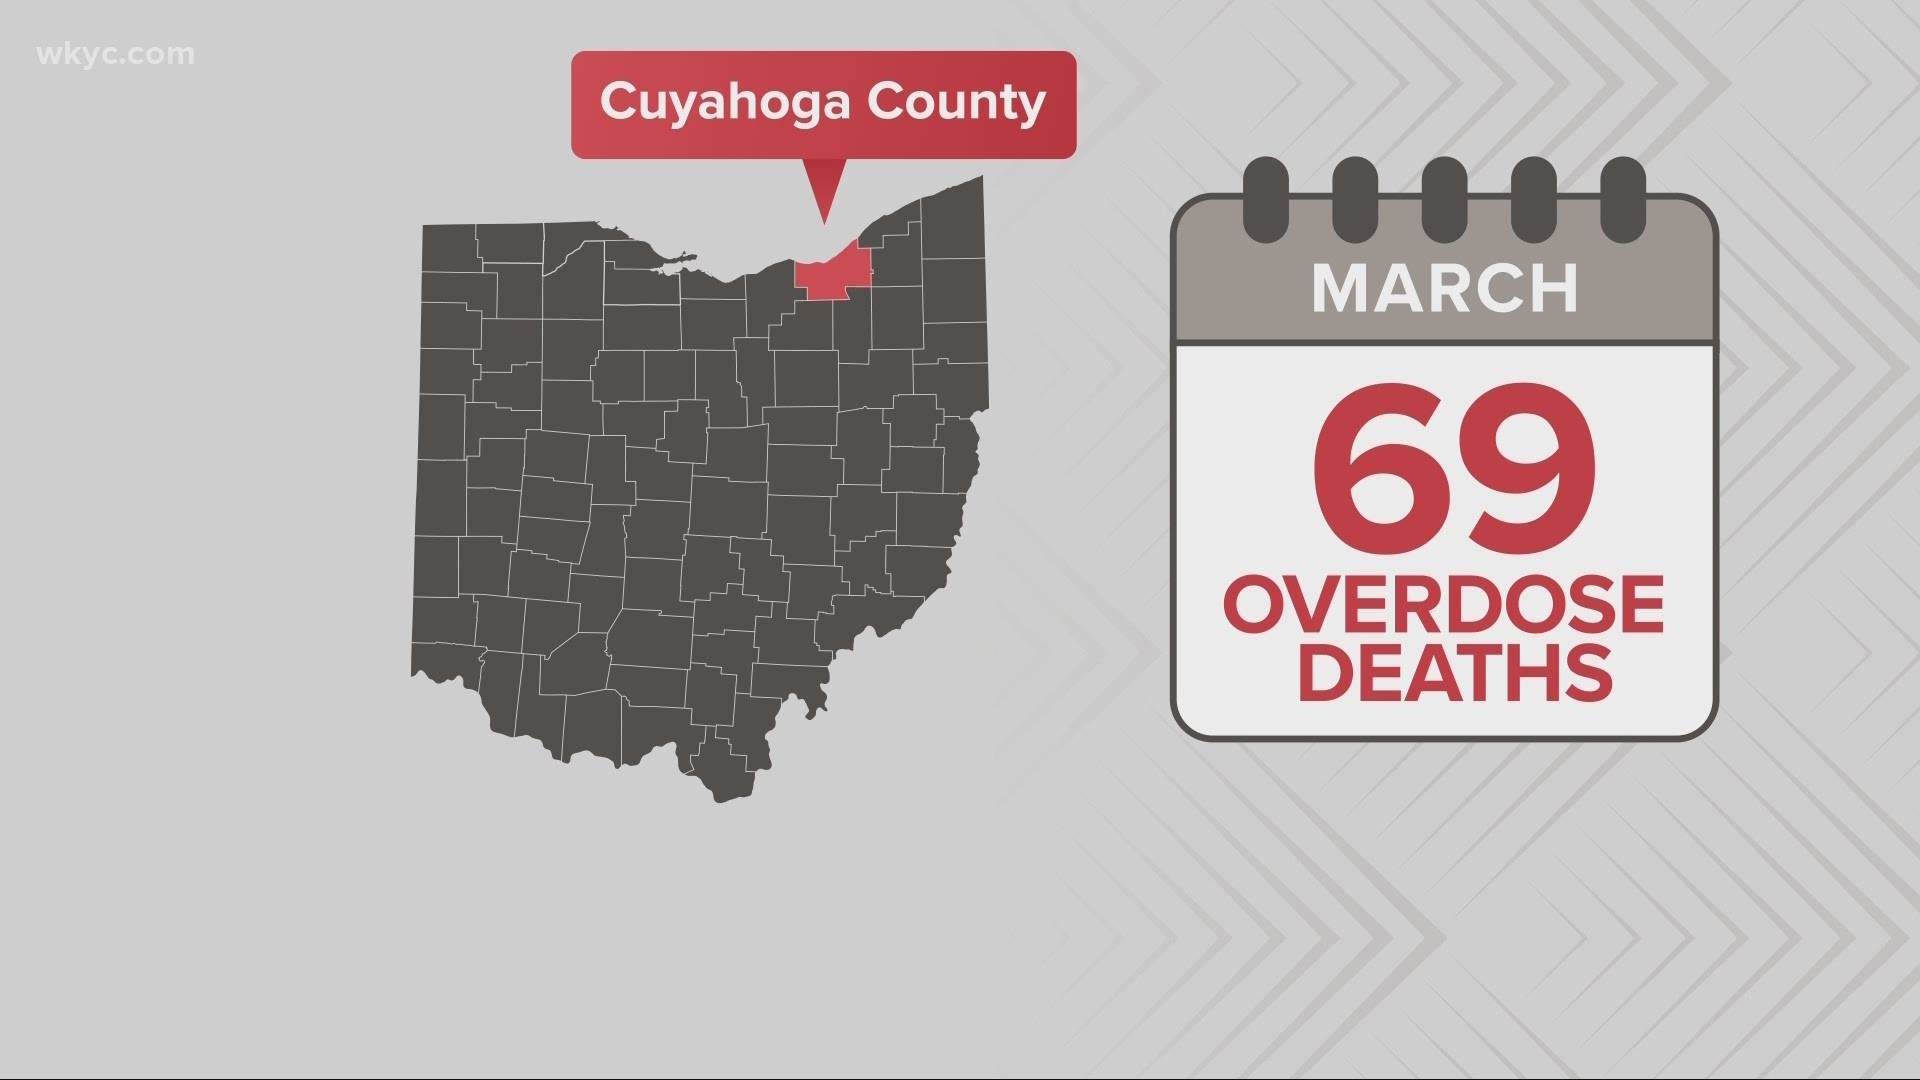 13 overdose deaths have already occurred in the first five days of April in Cuyahoga County.